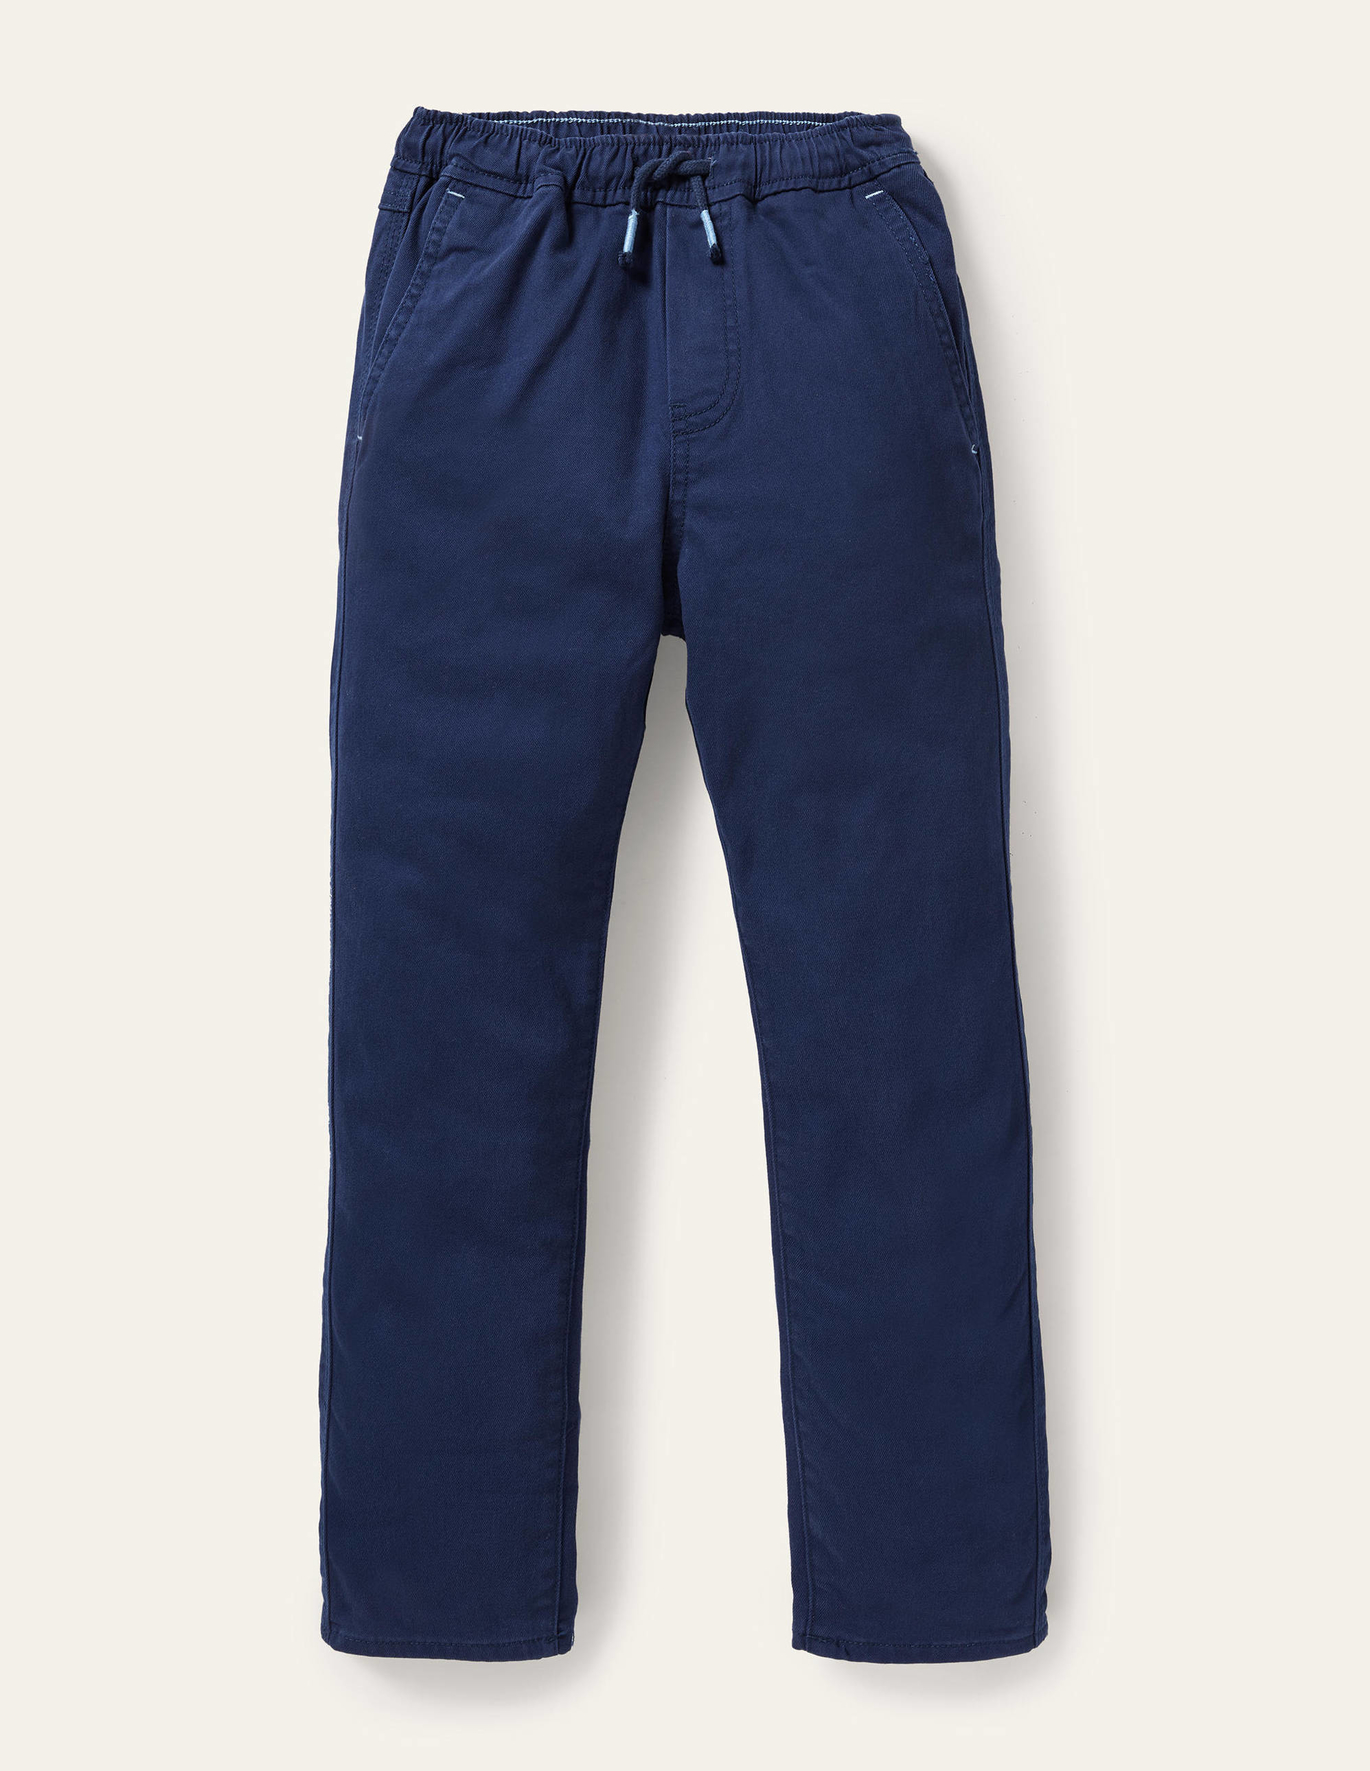 Boden Relaxed Slim Pull-on Pants - College Navy